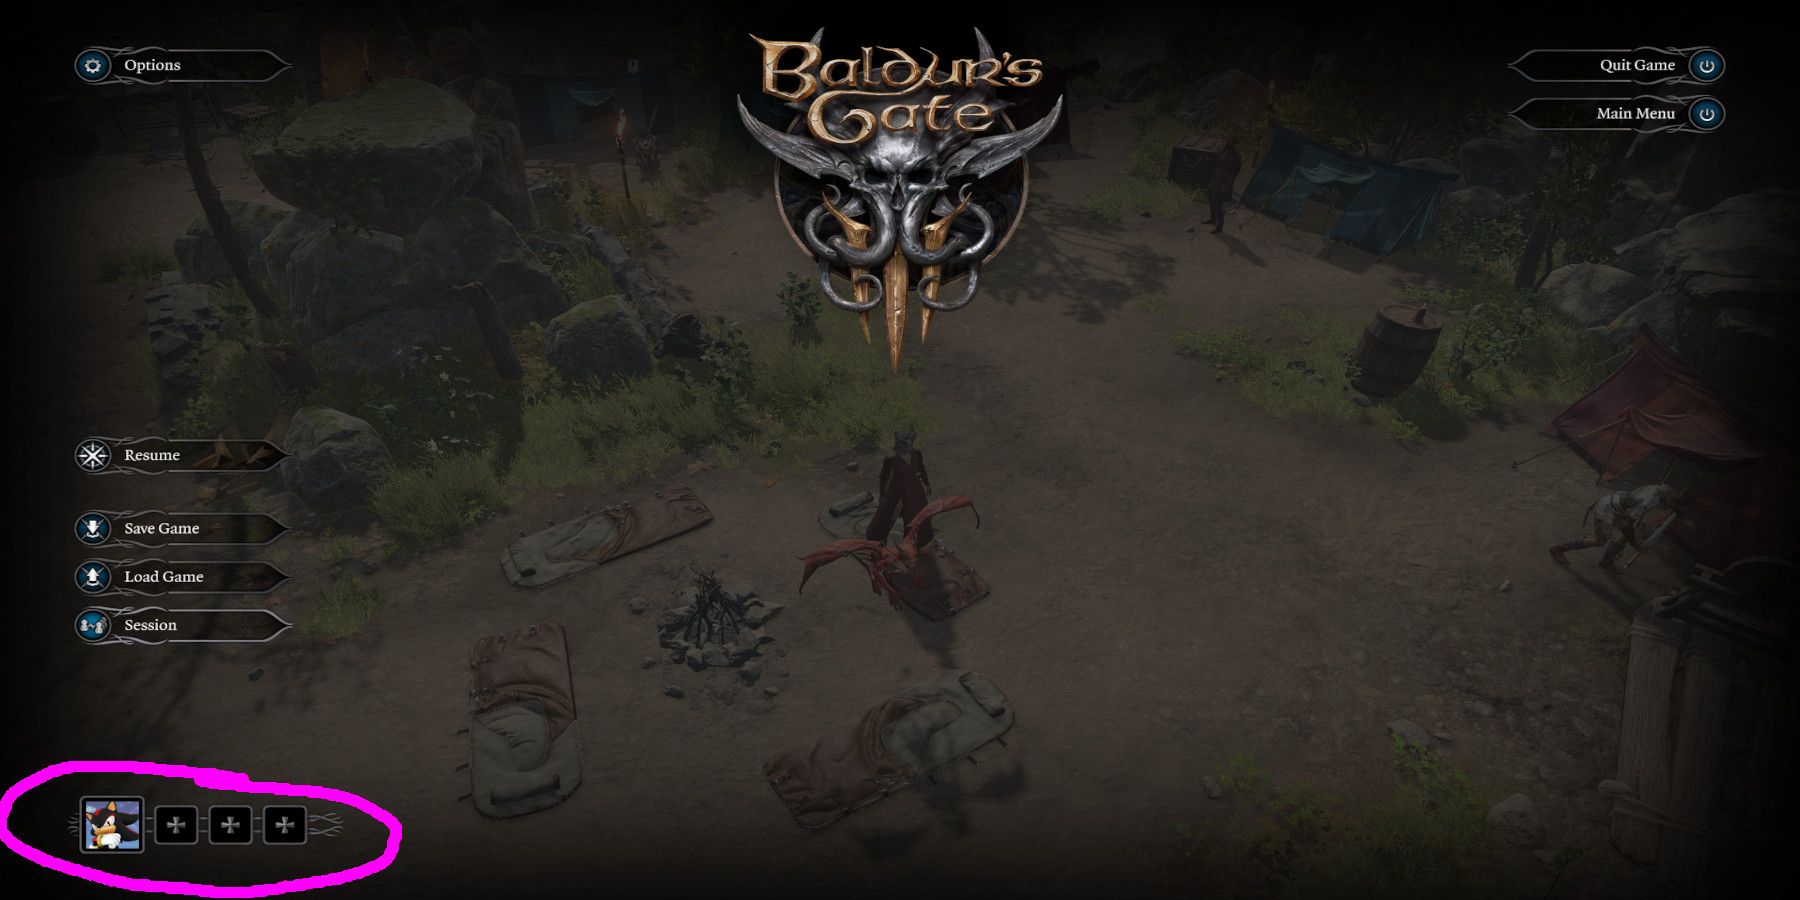 Baldurs-Gate-3-How-To-Play-With-Friends-05